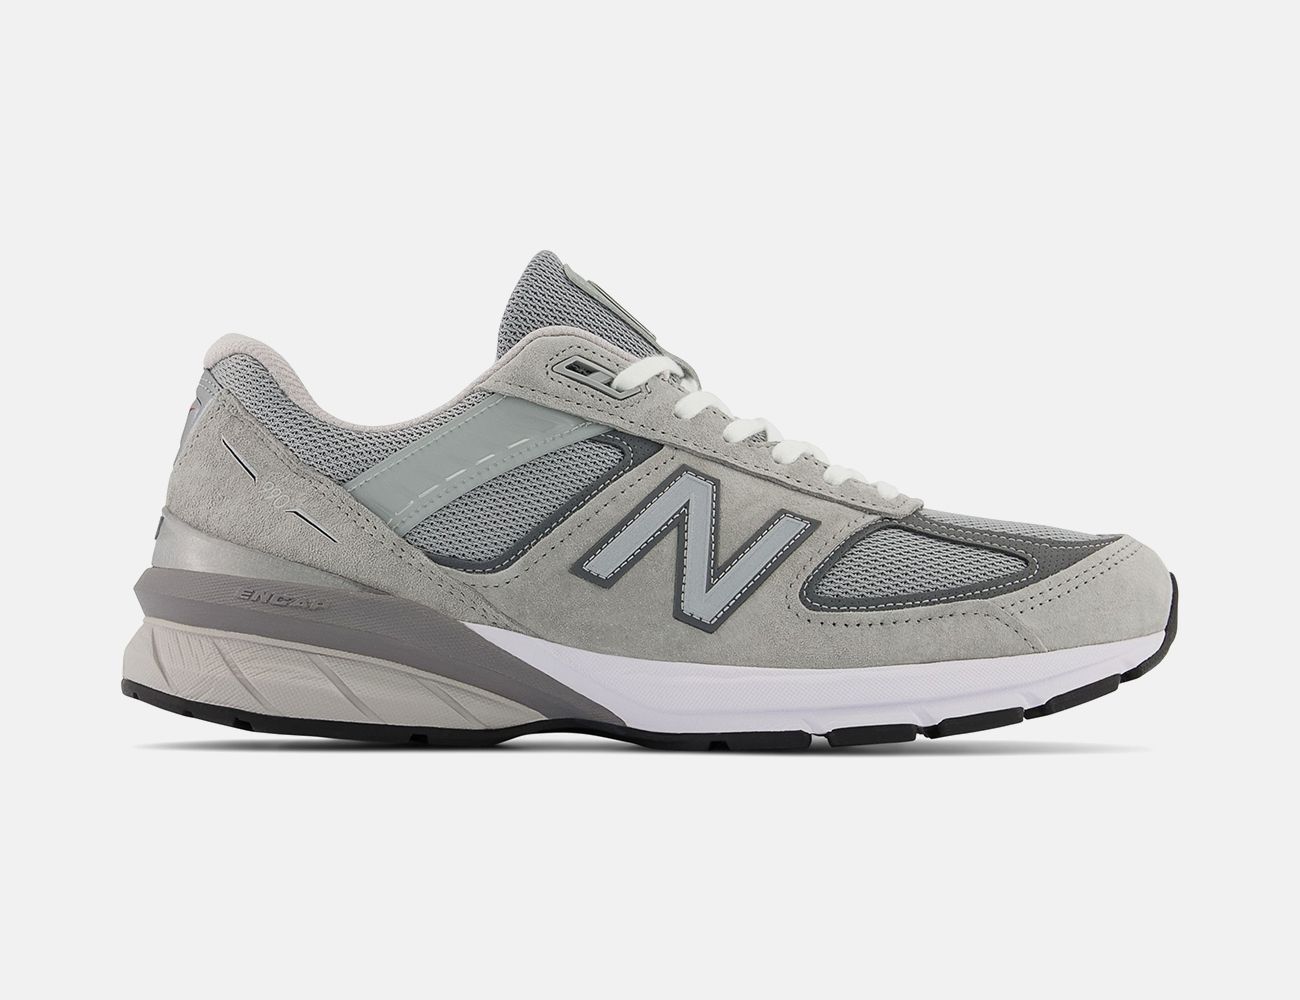 The Complete Guide To New Balance Sneakers: All Styles,